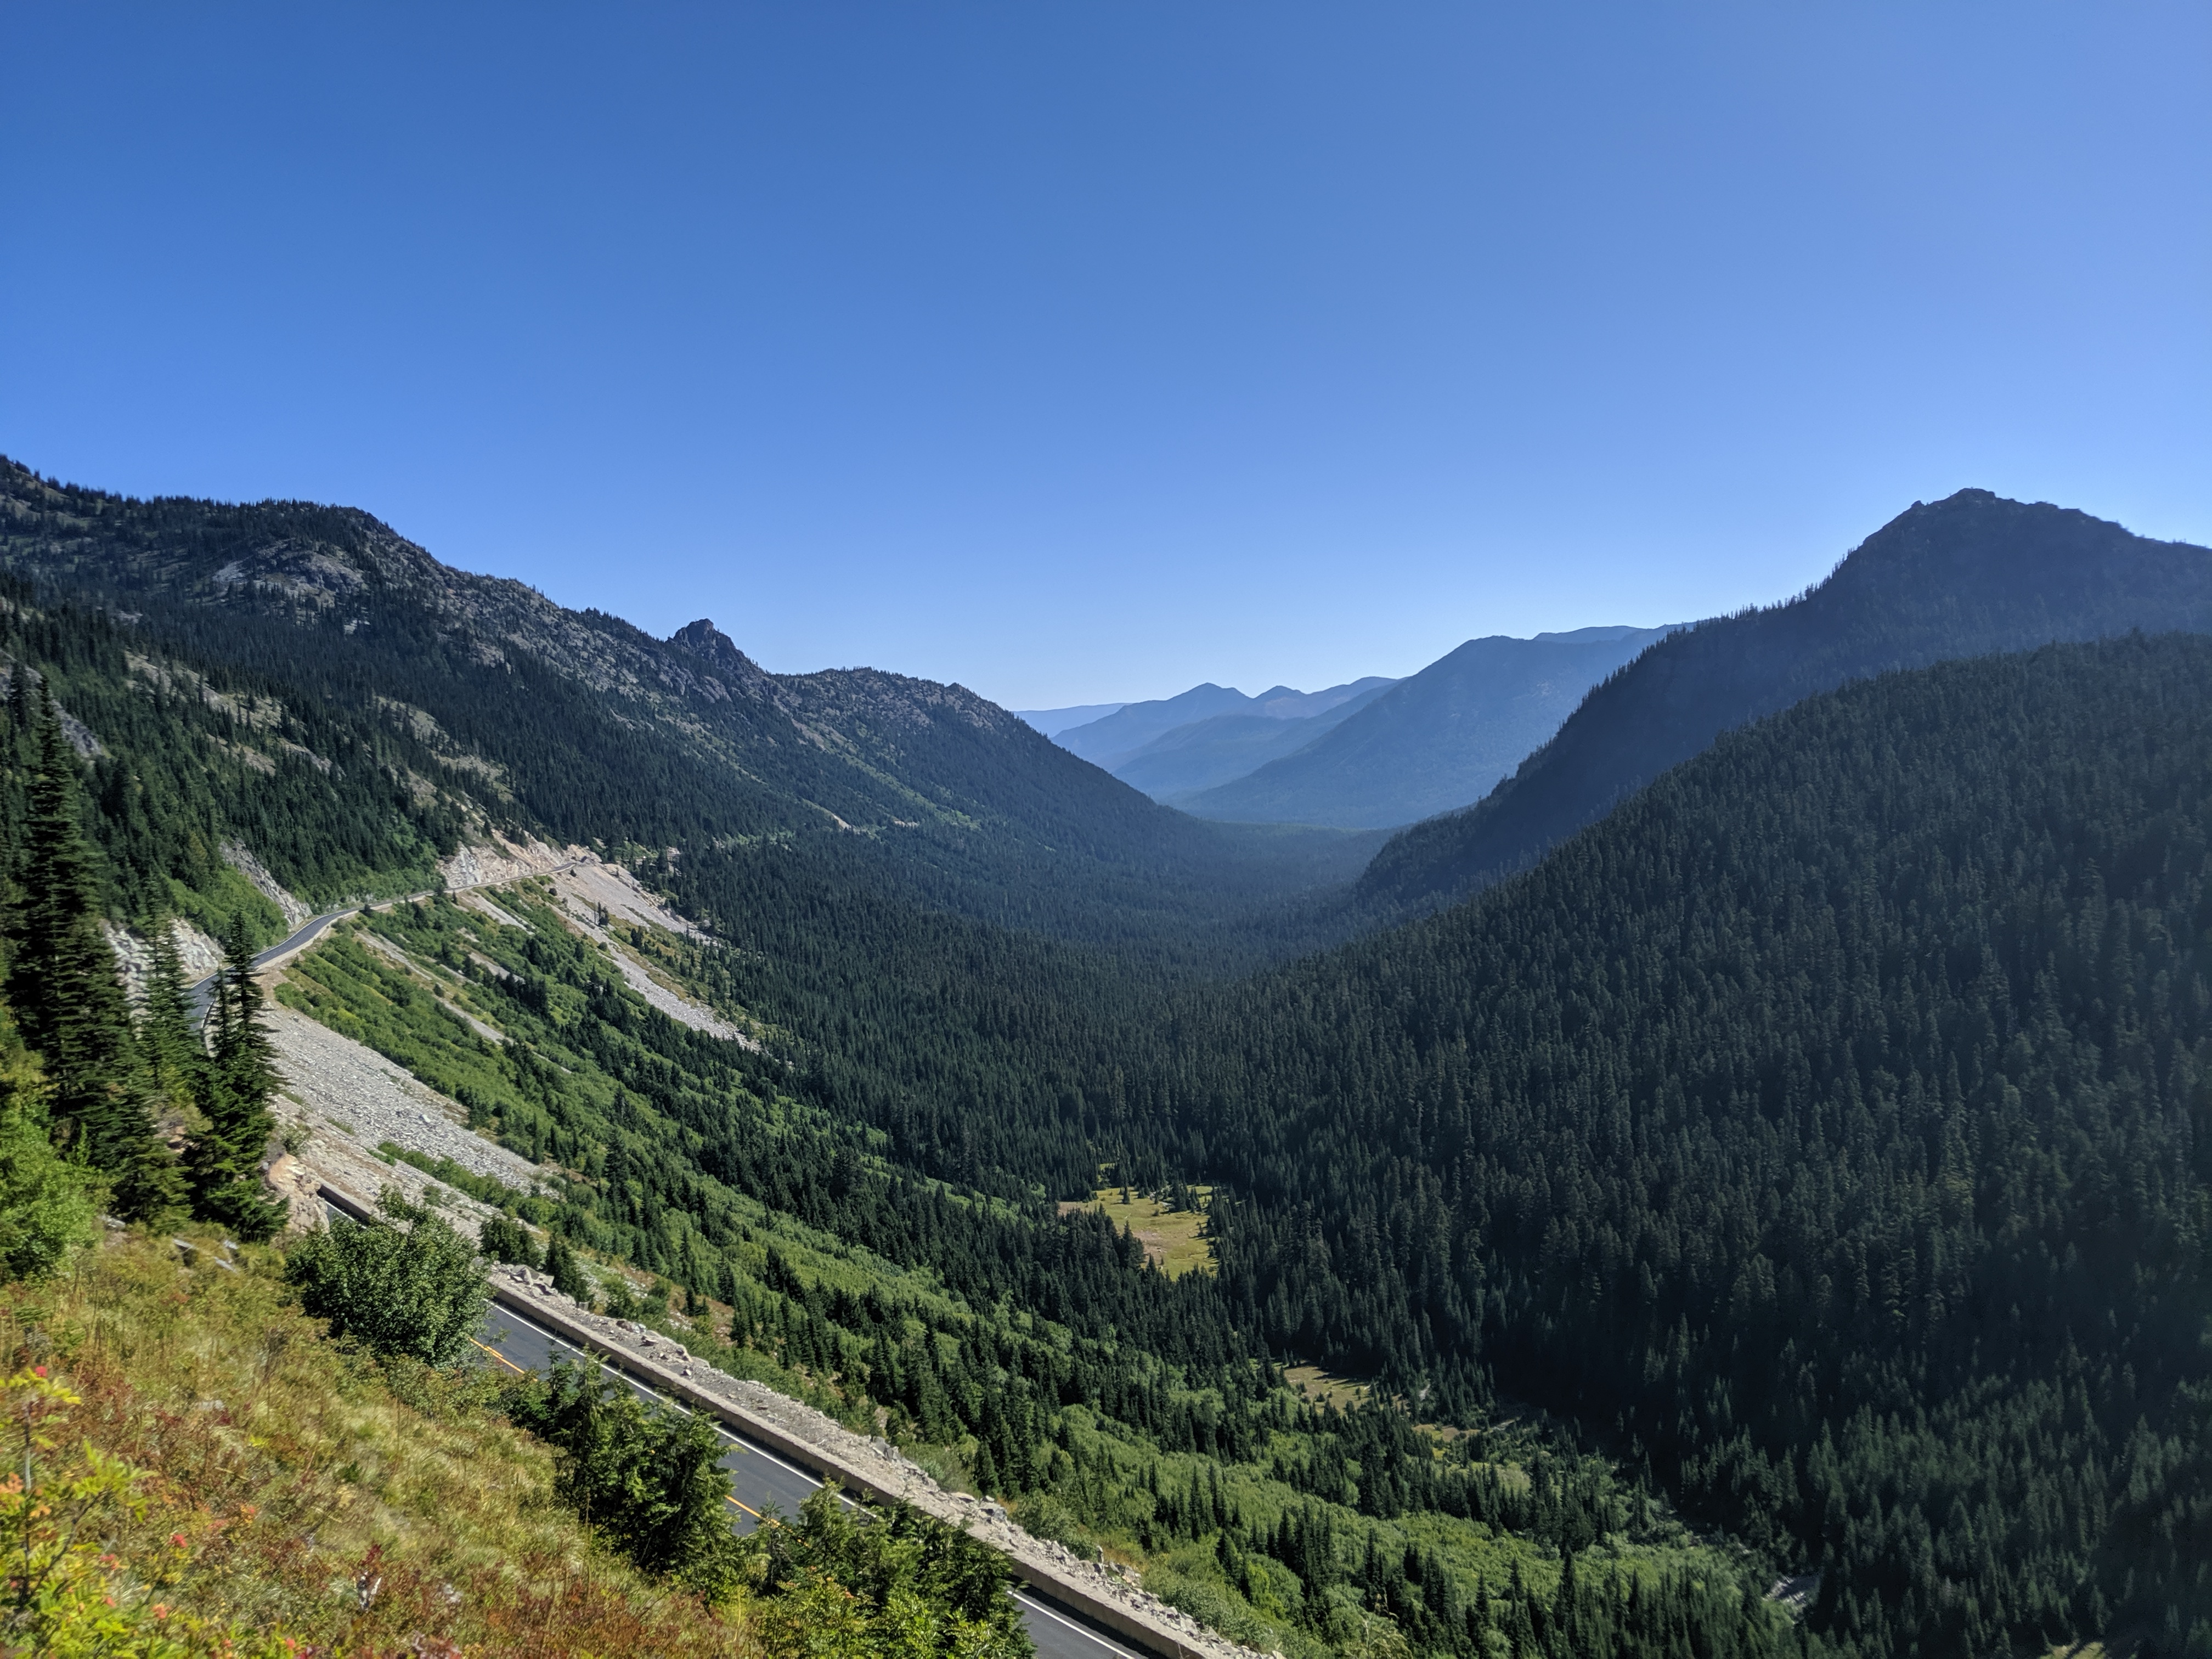 Day 109: Chinook Pass and Camp Urich